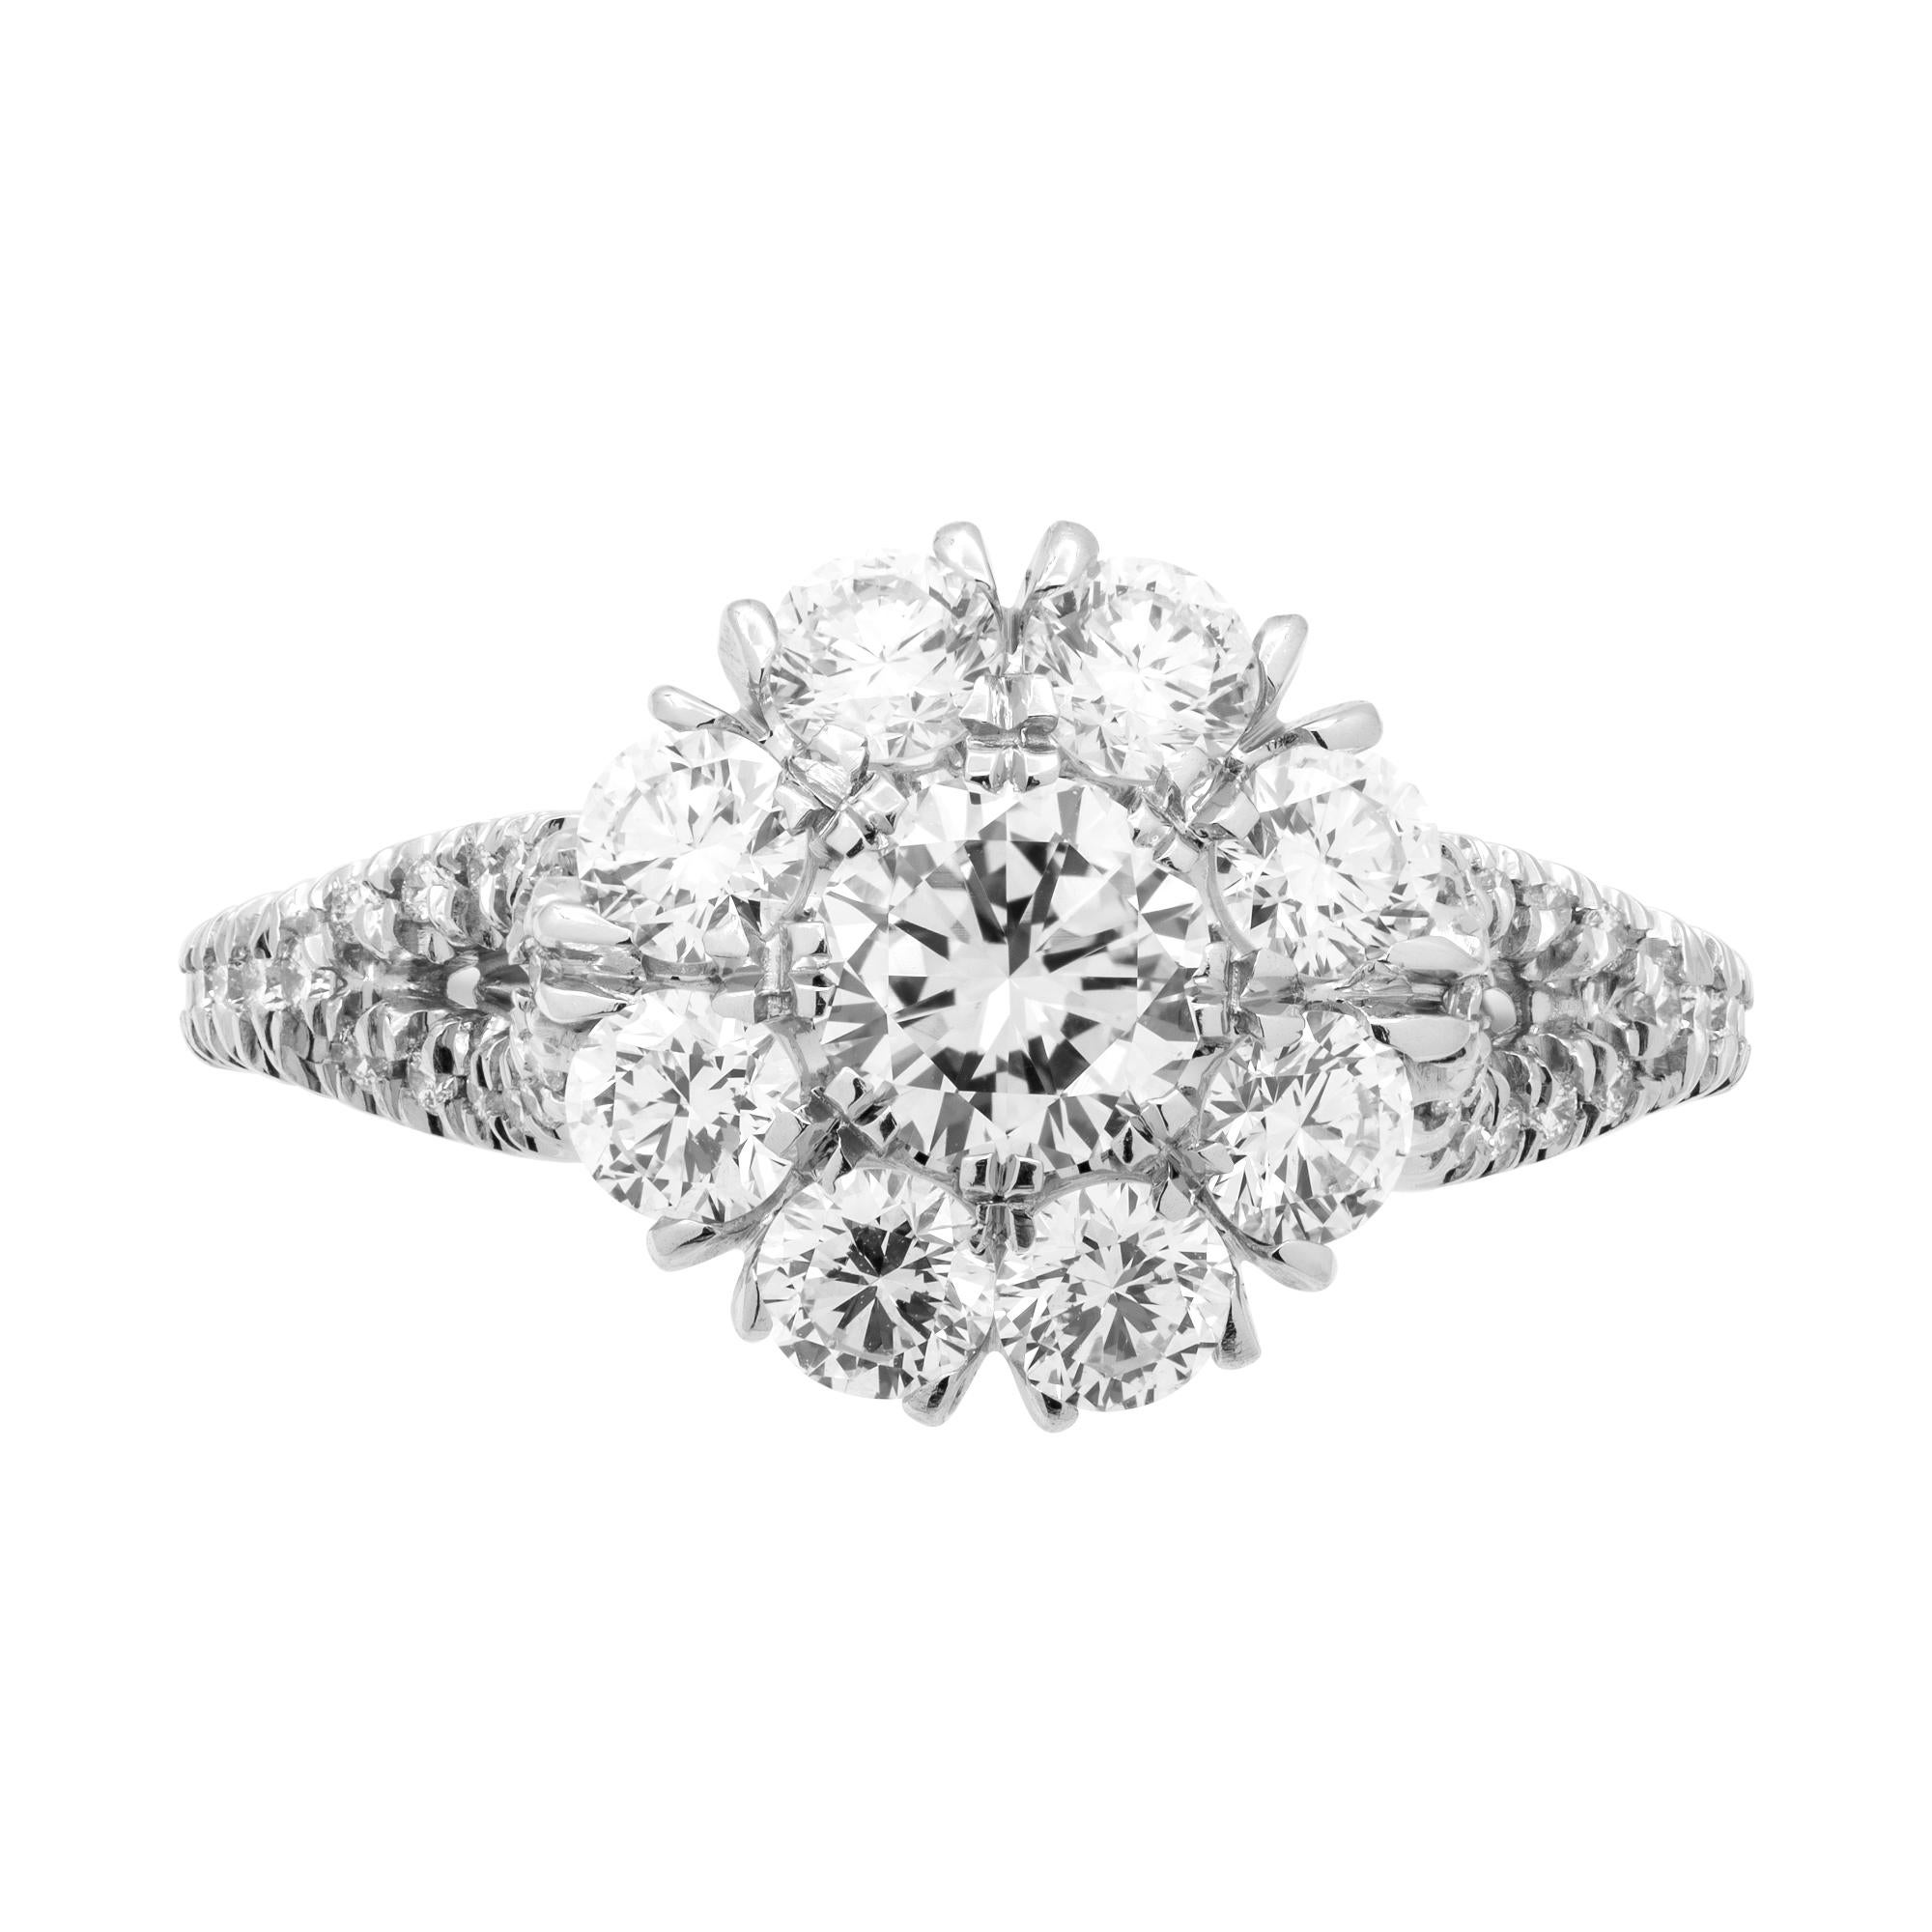 Mounted in handmade custom design setting featuring Platinum 950, 8 white full cut diamonds that form a beautiful flower (looks like 4ct solid round stone!), pave diamonds are encrusted all over the shank that splits into beautiful arch when meets